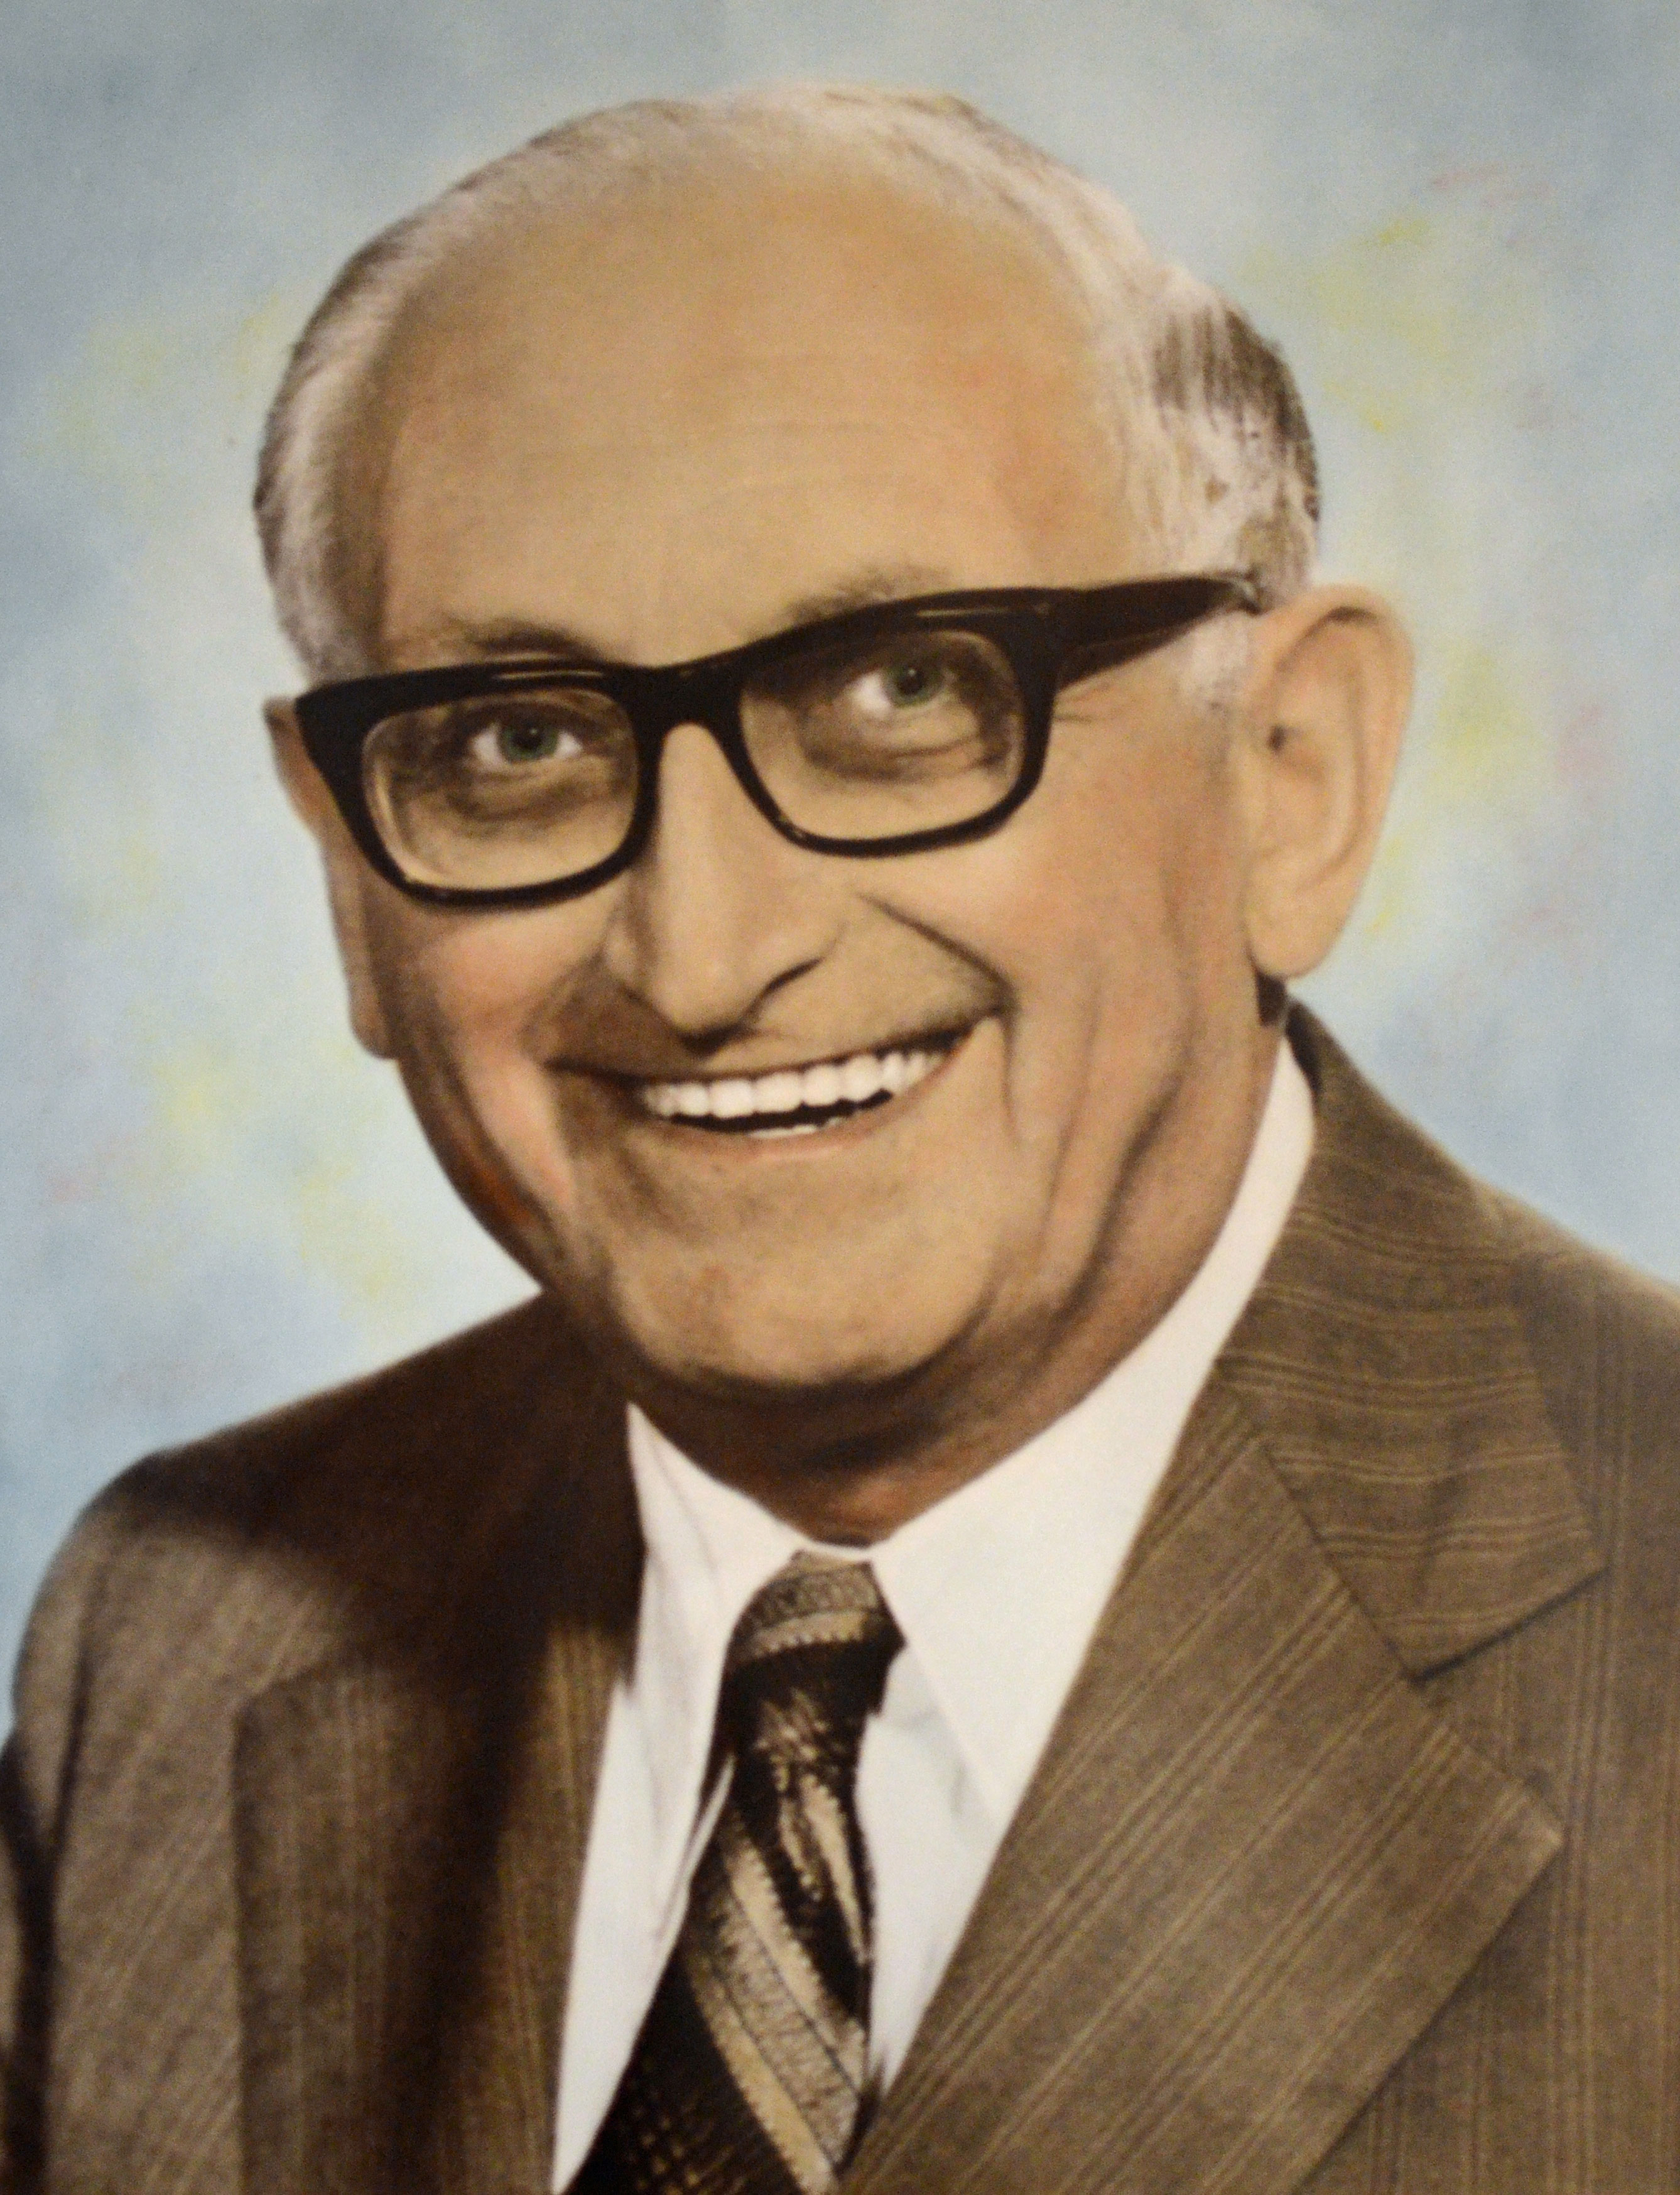 The late Herbert Baer, founder of our company